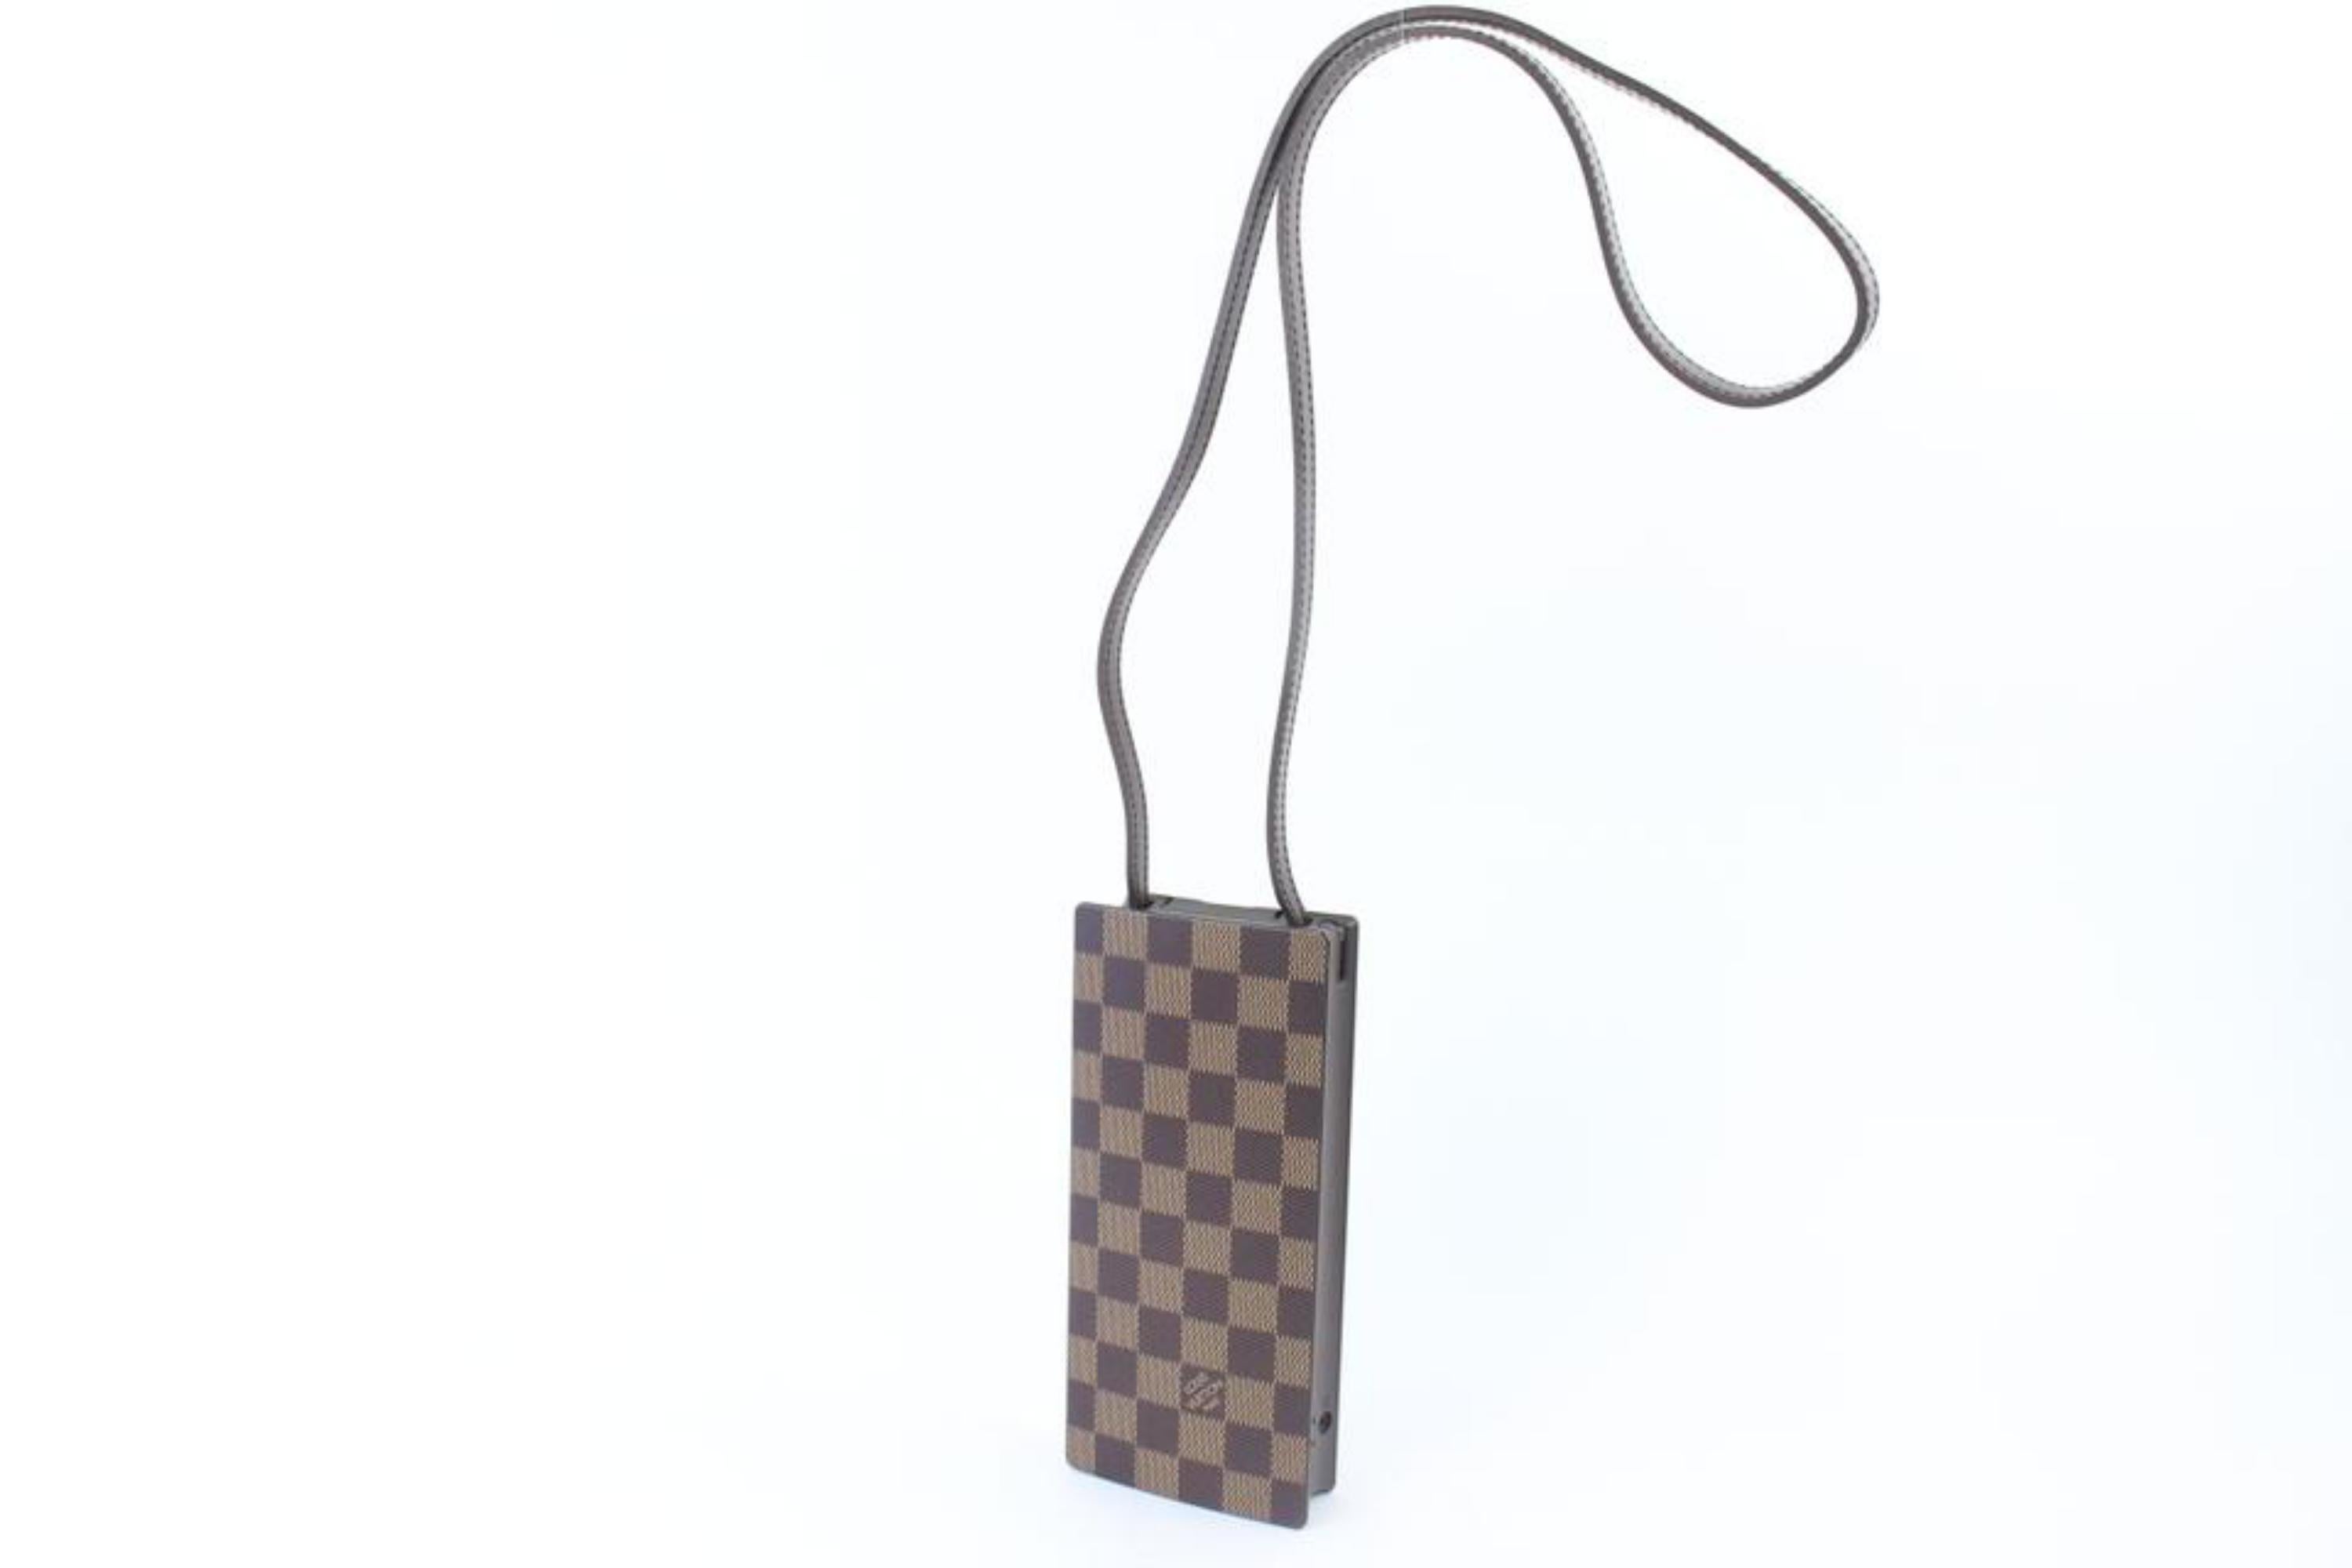 Louis Vuitton (Ultra Rare) Windows Pc 13lz0720 Damier Ebene Plastic Laptop Bag In Excellent Condition For Sale In Forest Hills, NY